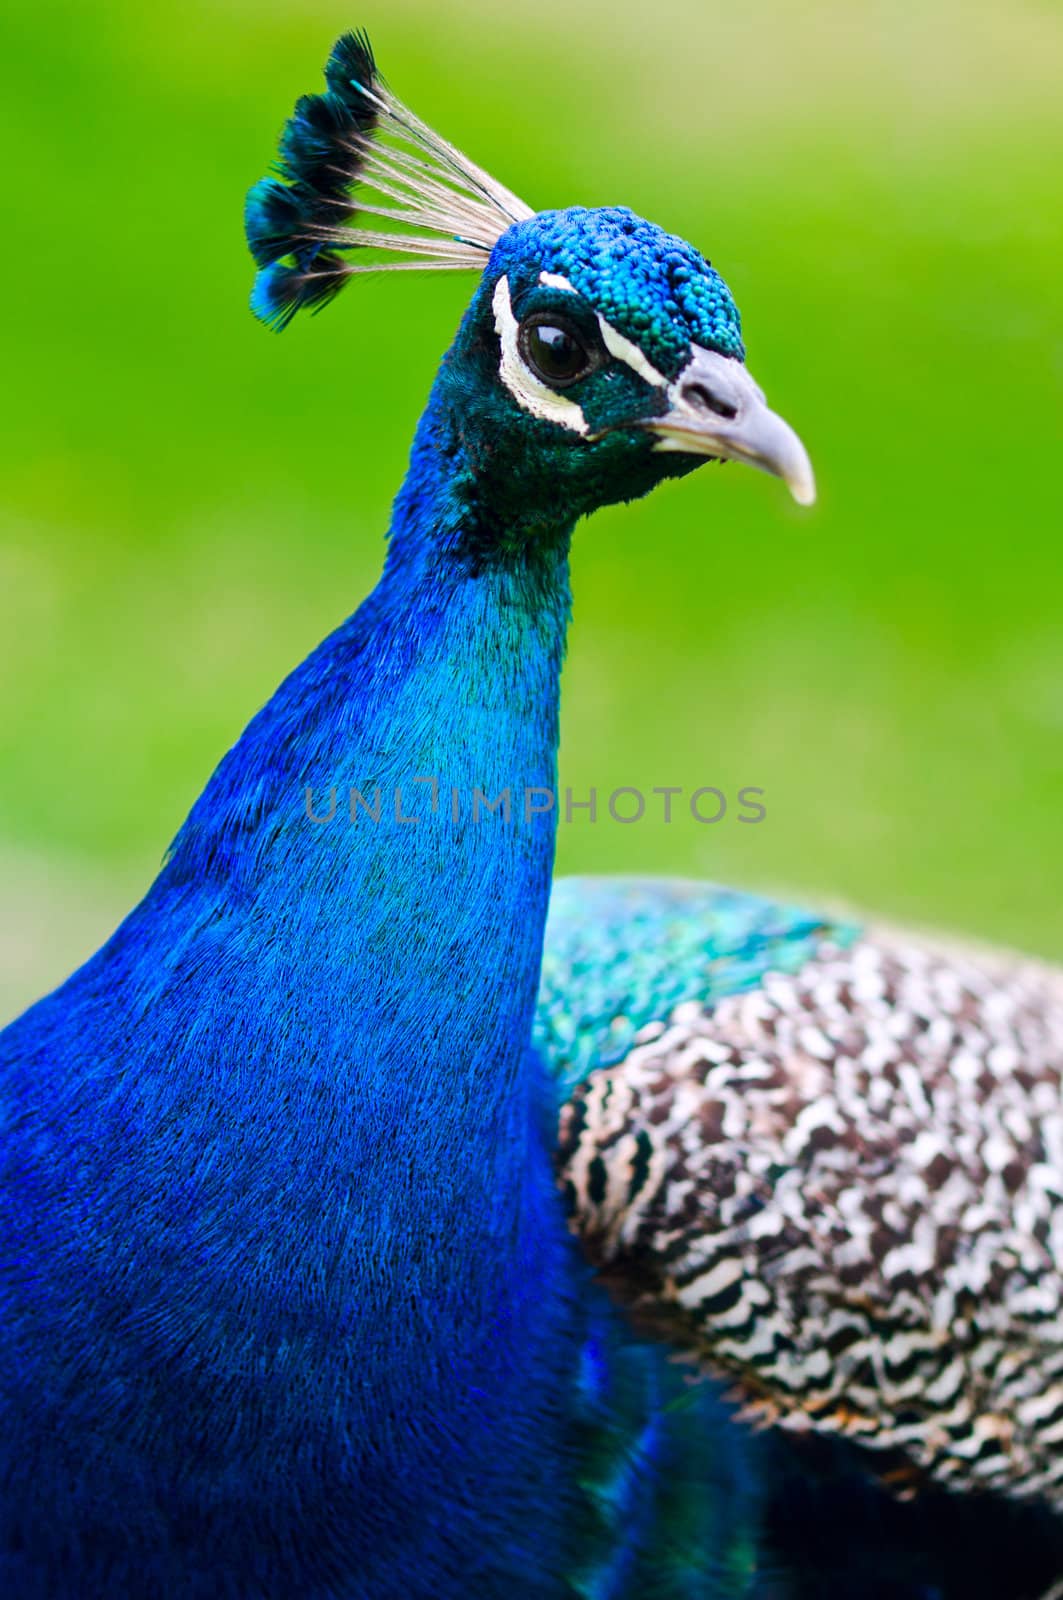 Beautiful and pride peacock on a lawn, blue in color